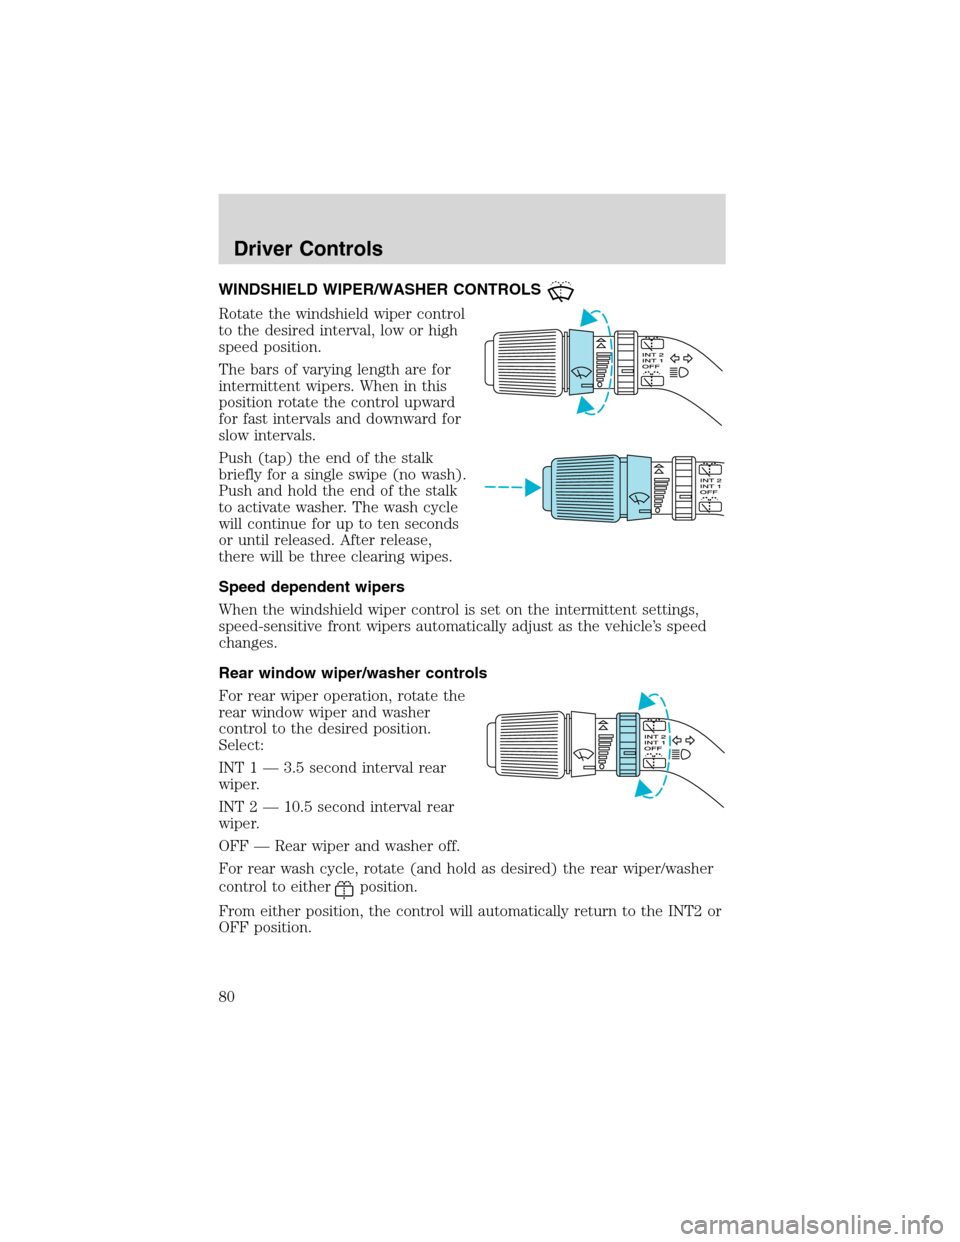 FORD EXCURSION 2004 1.G Manual PDF WINDSHIELD WIPER/WASHER CONTROLS
Rotate the windshield wiper control
to the desired interval, low or high
speed position.
The bars of varying length are for
intermittent wipers. When in this
position 